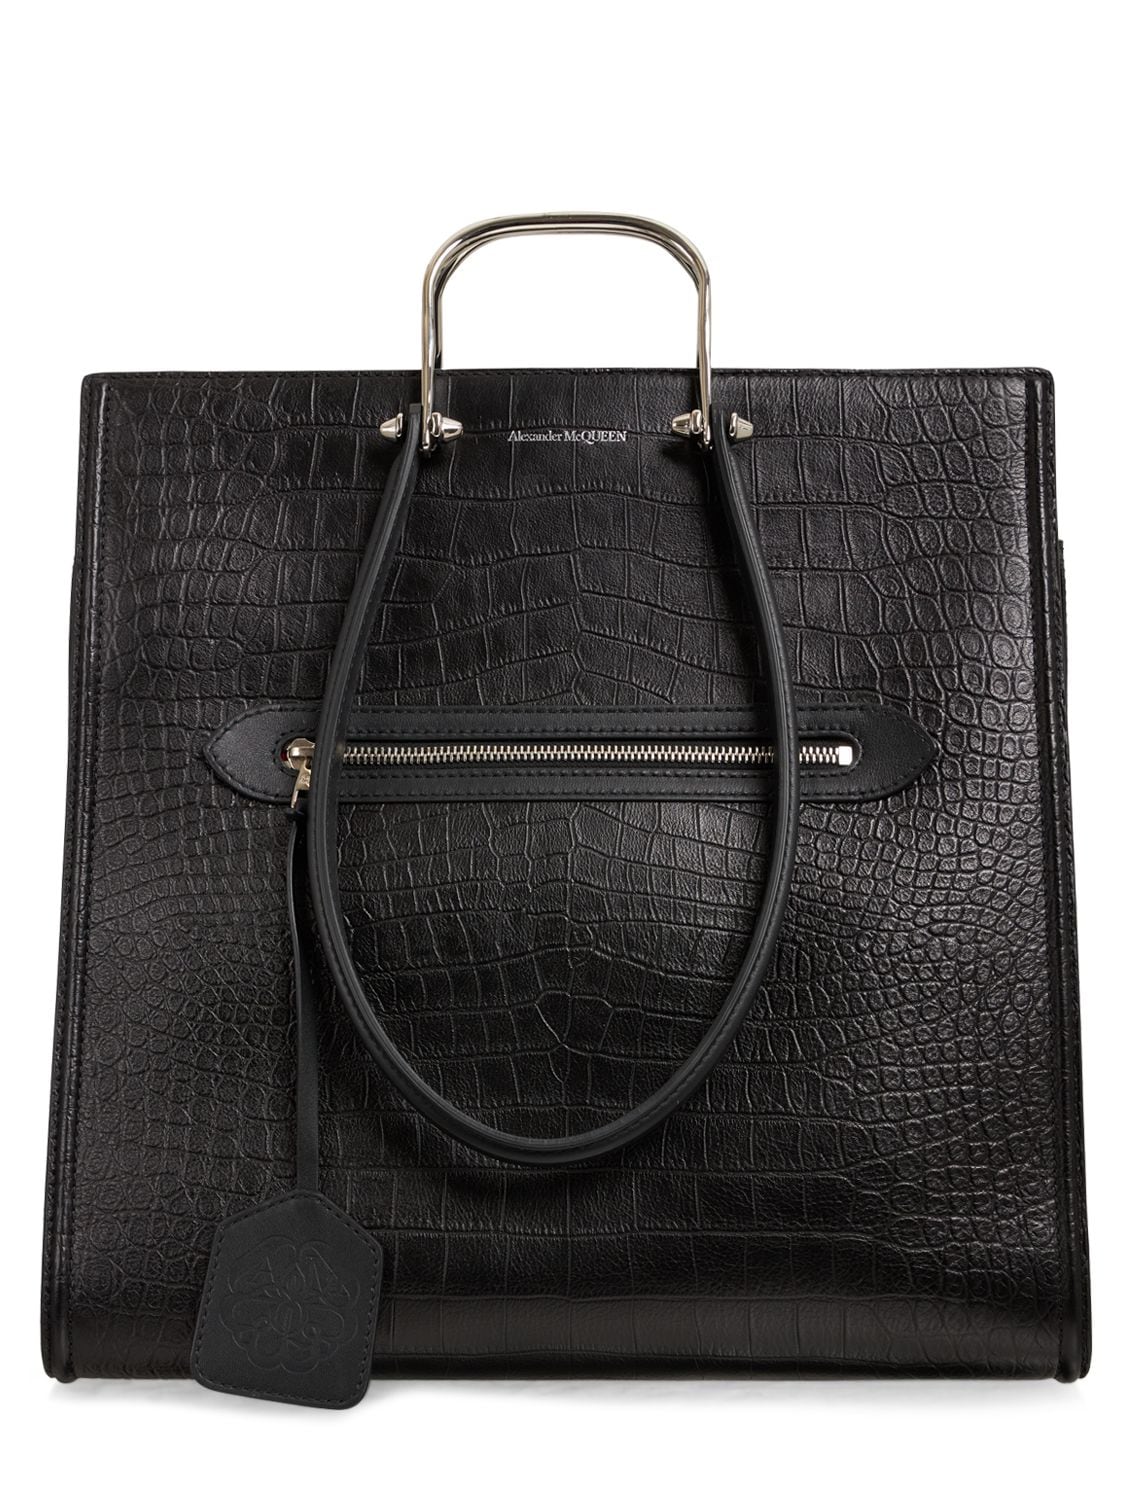 The Tall Story Croc Print Embossed Tote